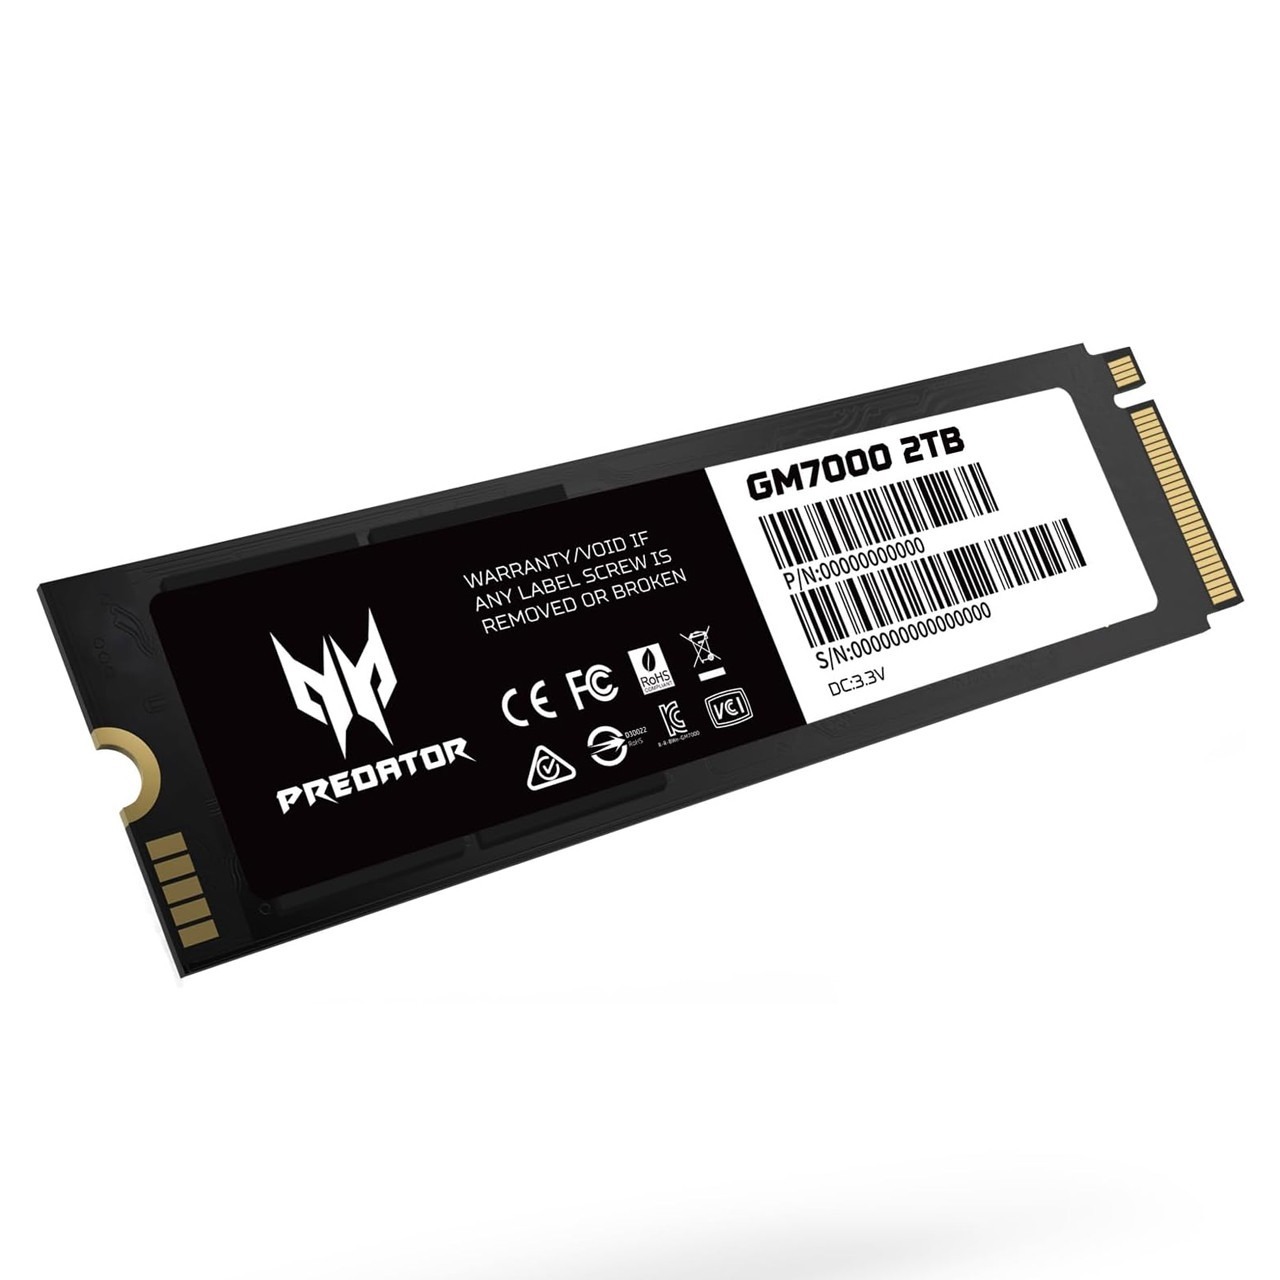 2TB Acer Predator GM7000 NVMe PCIe Gen4 Gaming Solid State Drive $114 Free Shipping